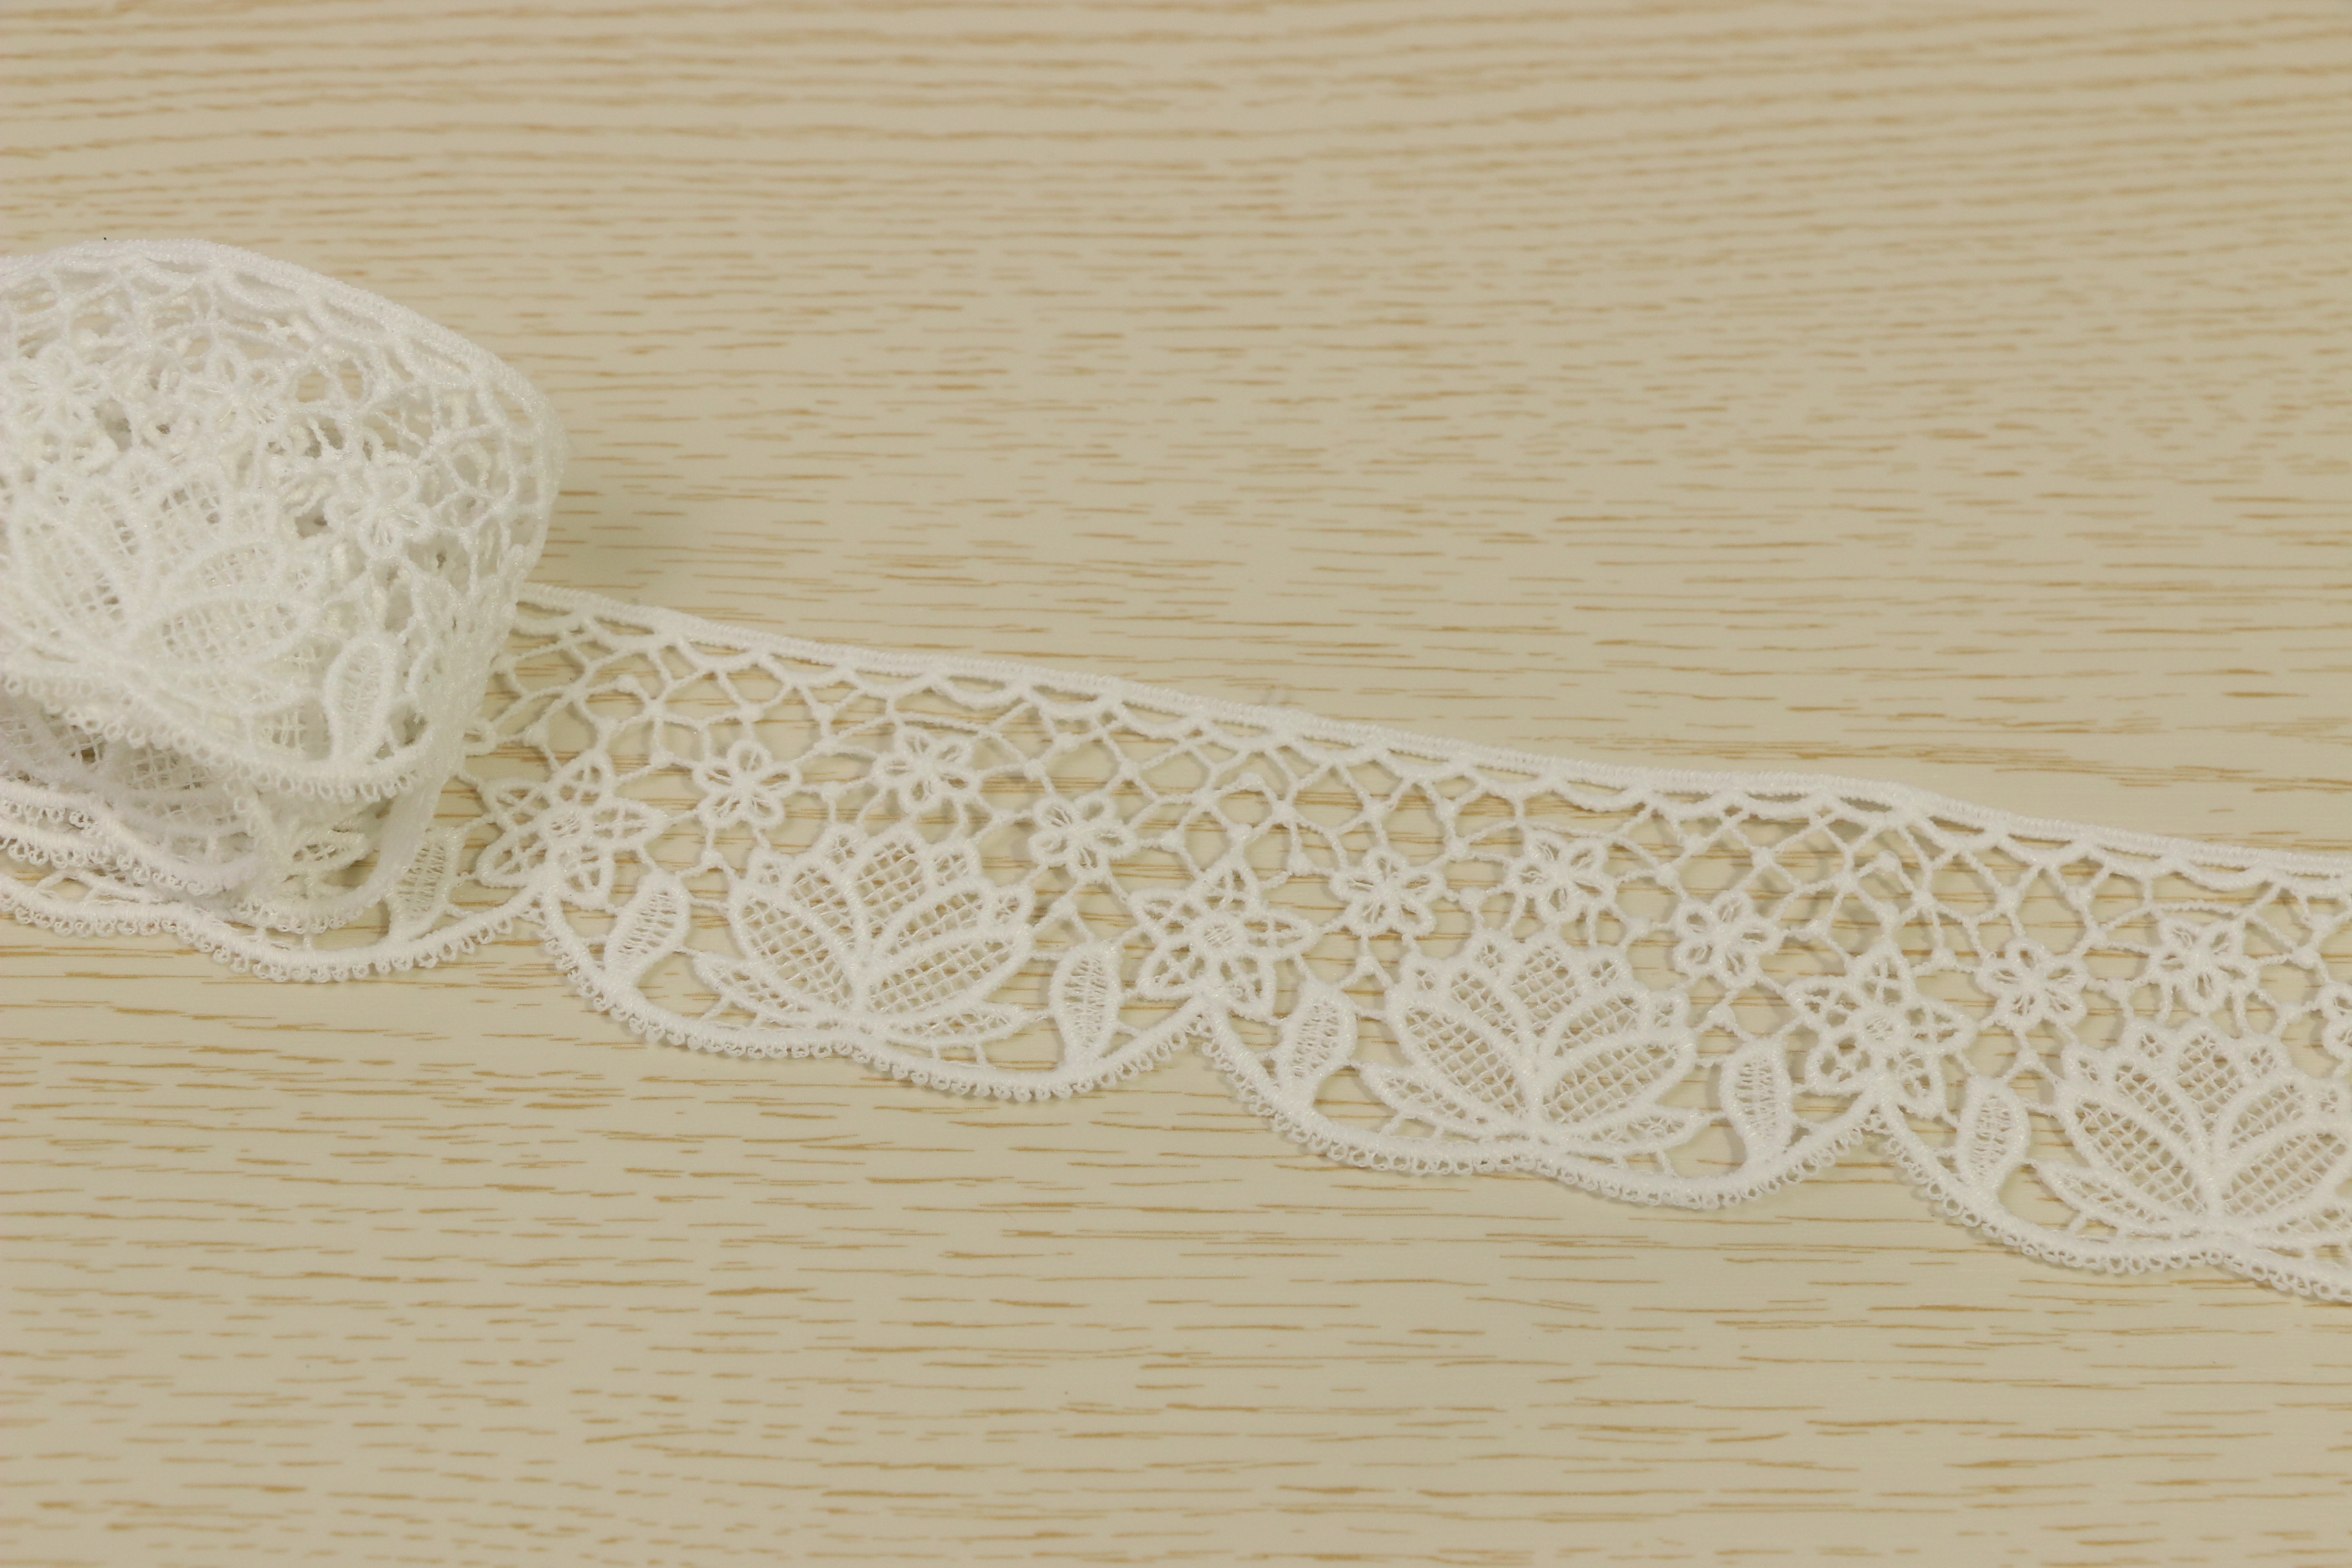  100% Polyester Decorative Chemical Lace Trim For Dressing And Bedding Manufactures